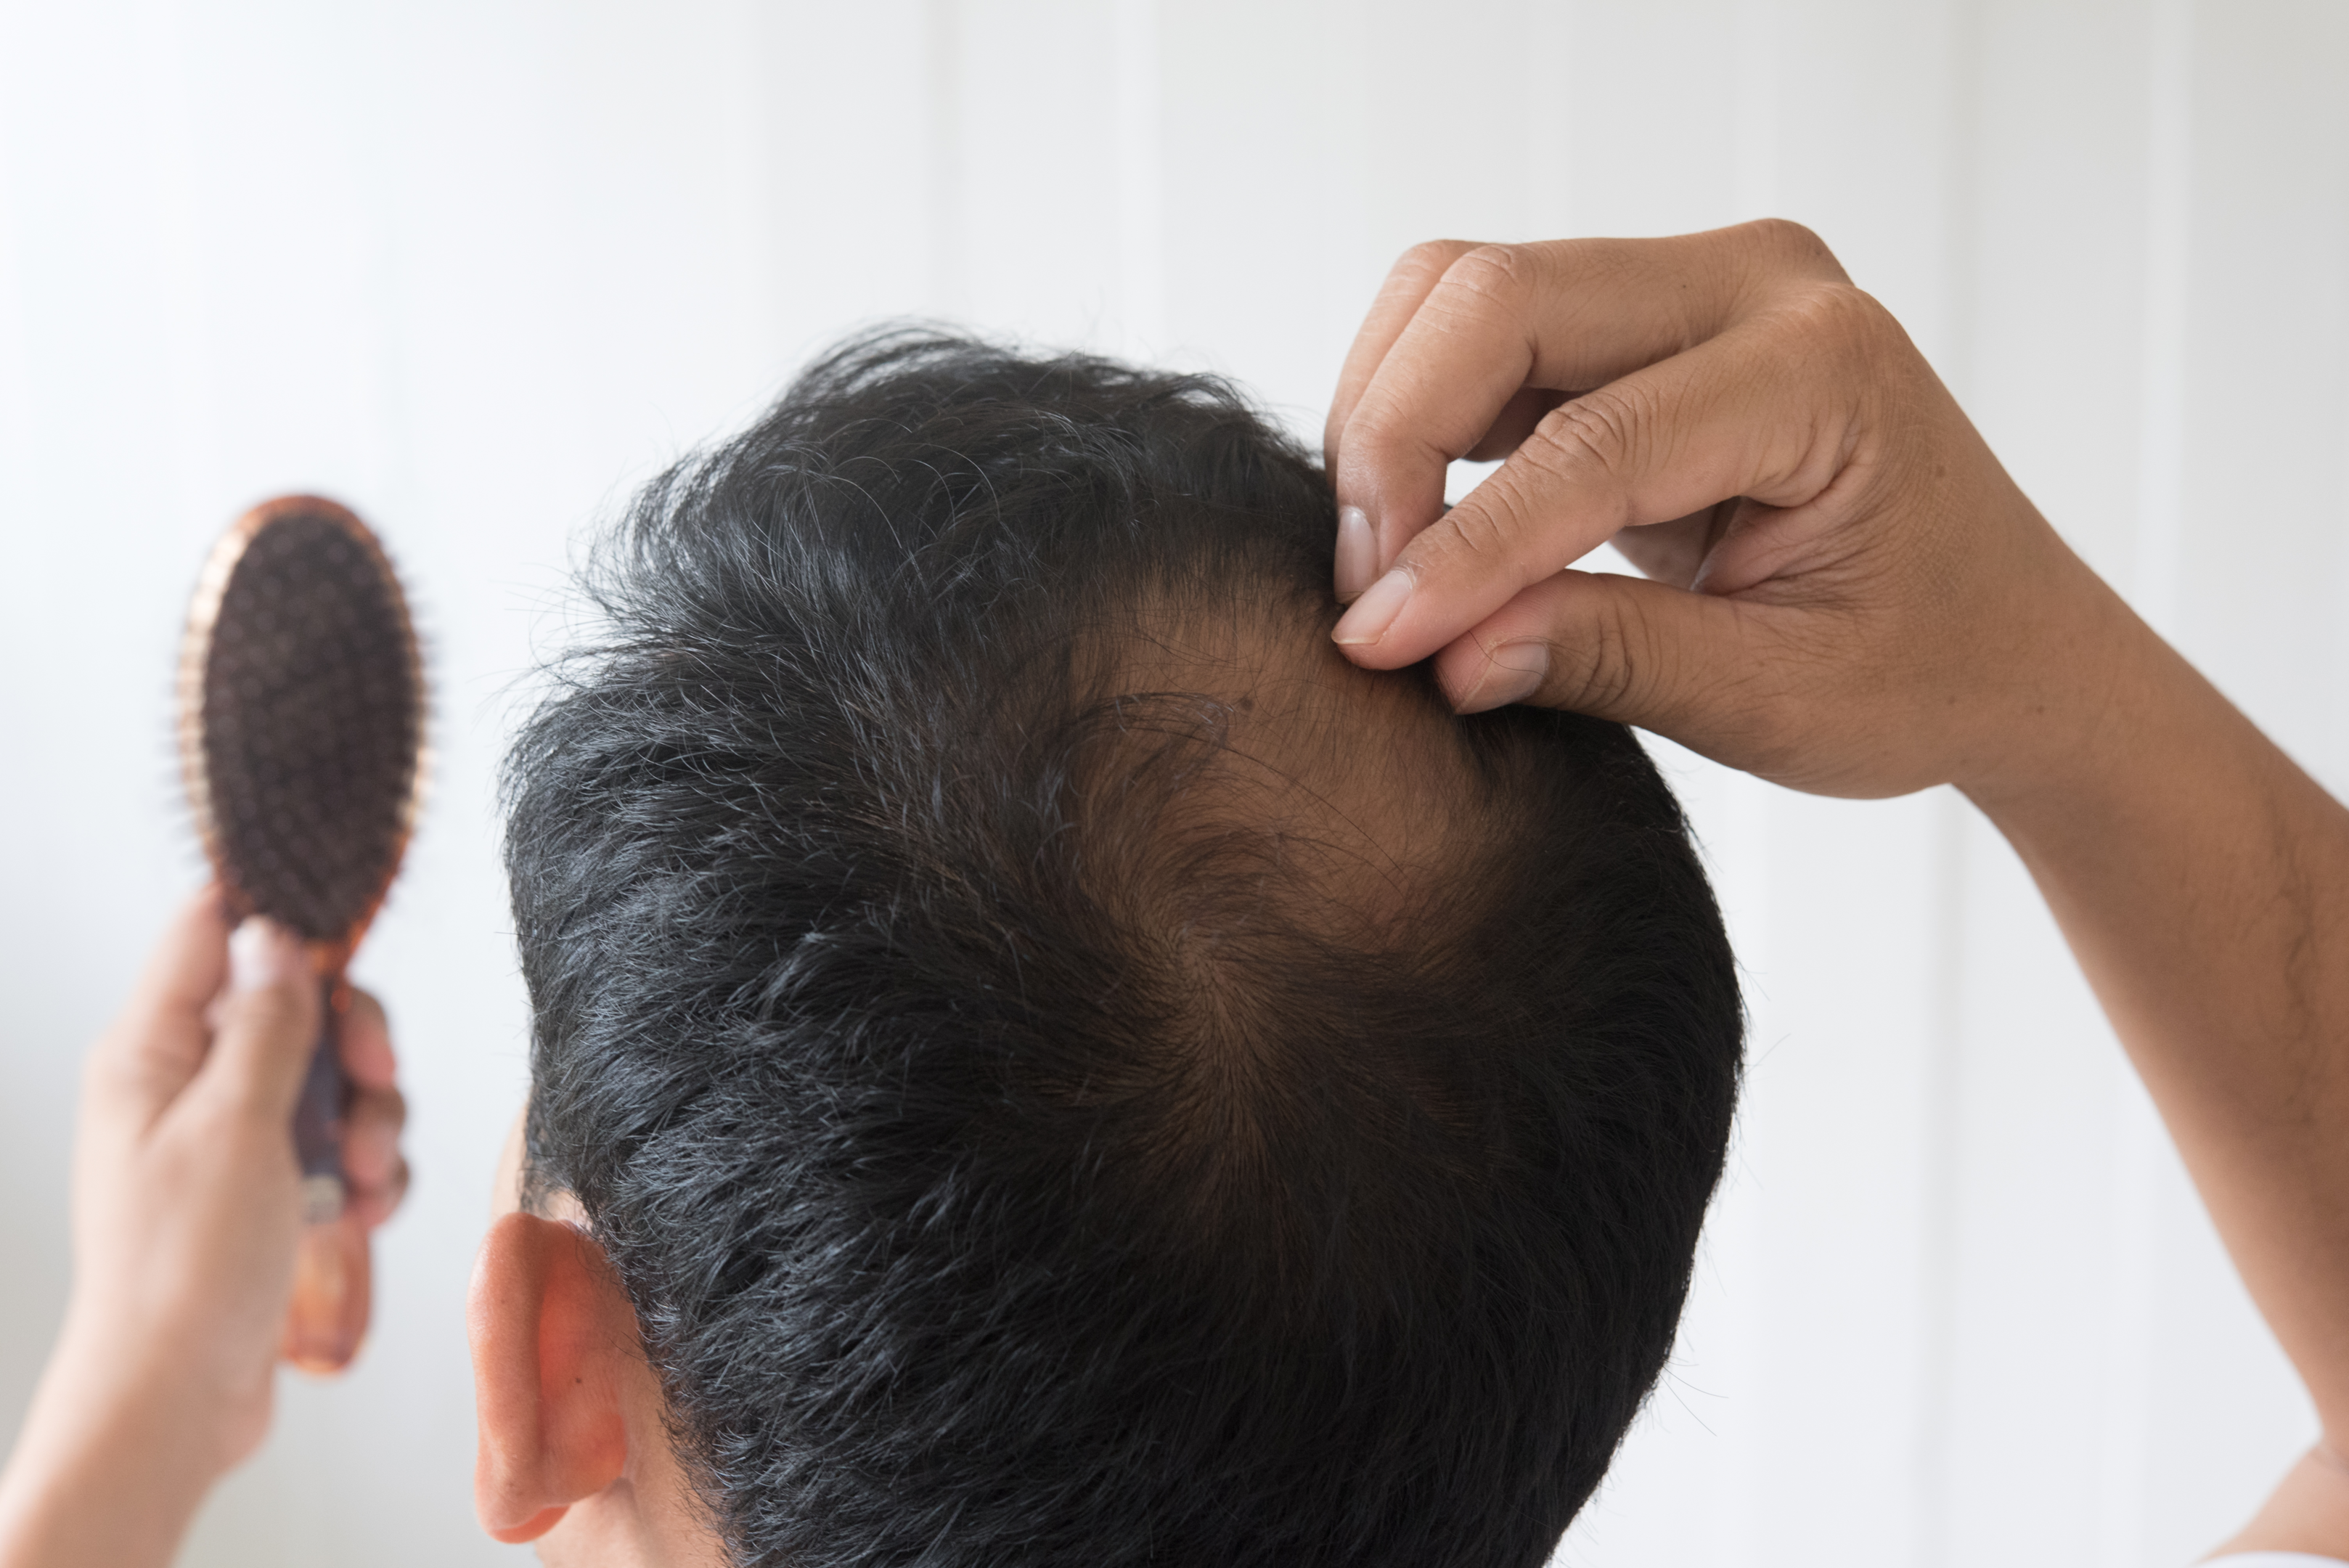 hair follicle growth can be impacted by male pattern baldness and female pattern baldness 